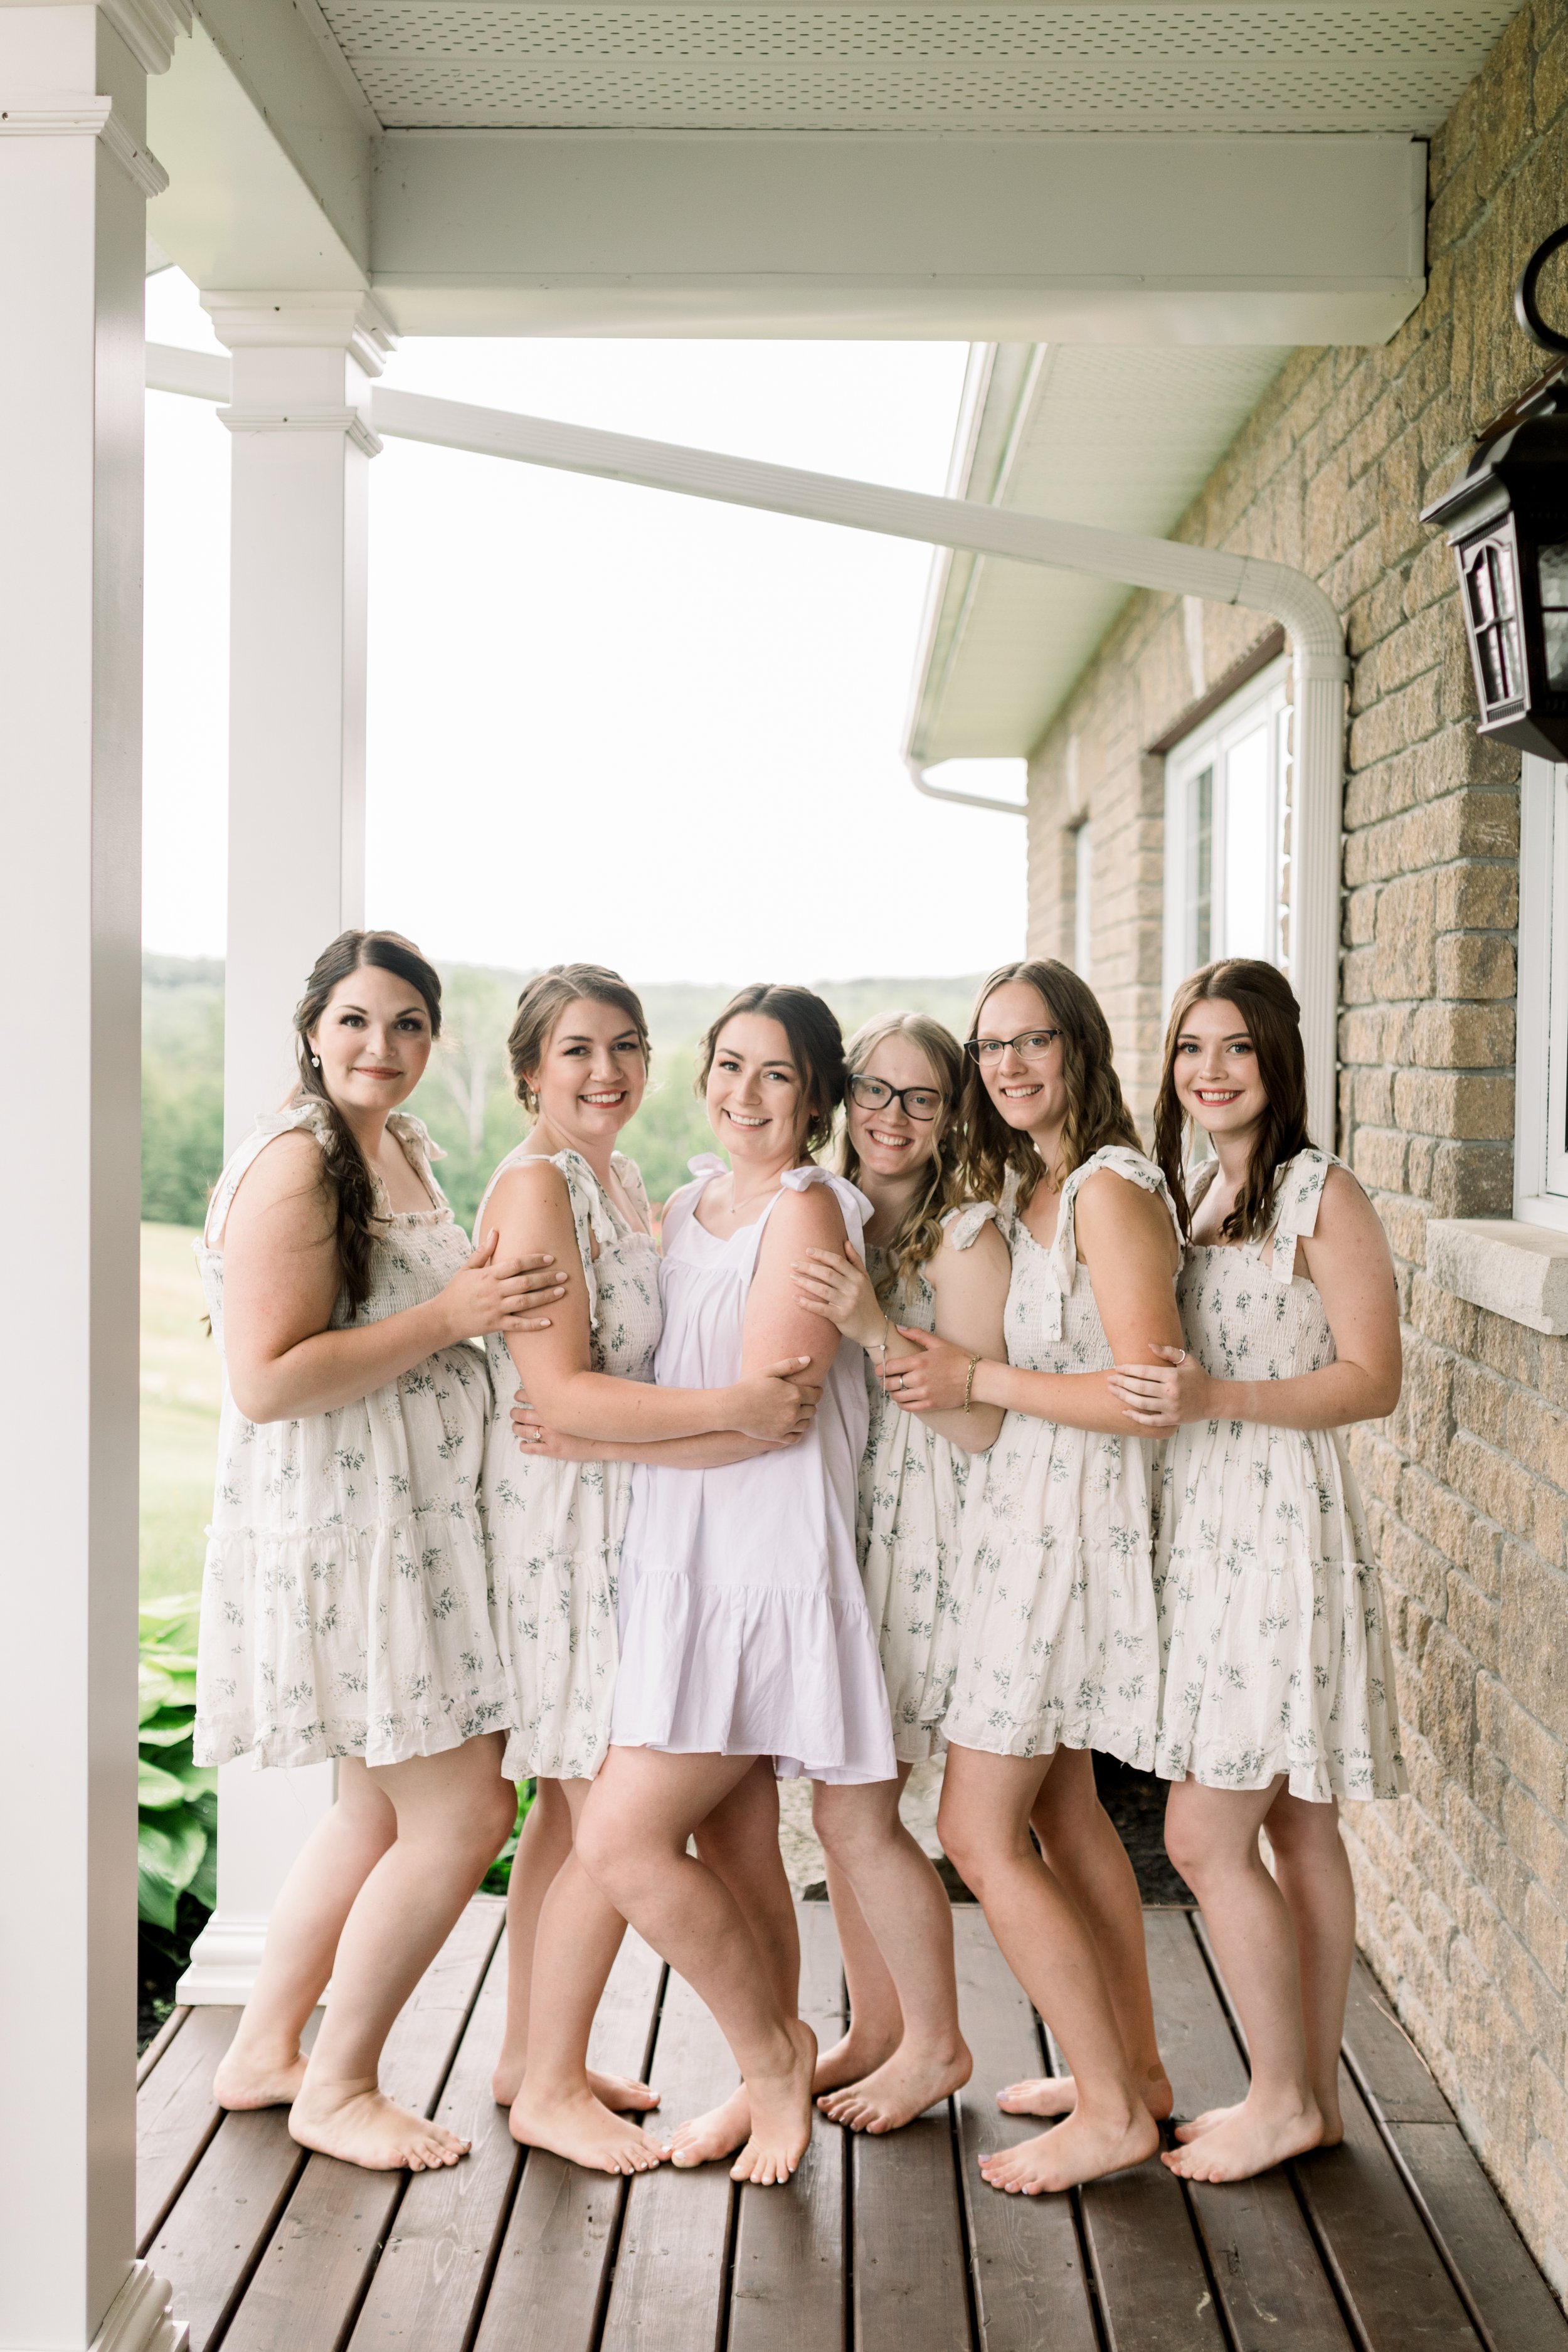  A bride with her bridesmaids on a wooden porch in floral dresses by Chelsea Mason Photography. bridesmaids getting ready porch portrait #chelseamasonphotography #chelseamasonweddings #Ontarioweddings #Boulterweddingphotographer #laceweddinggown 